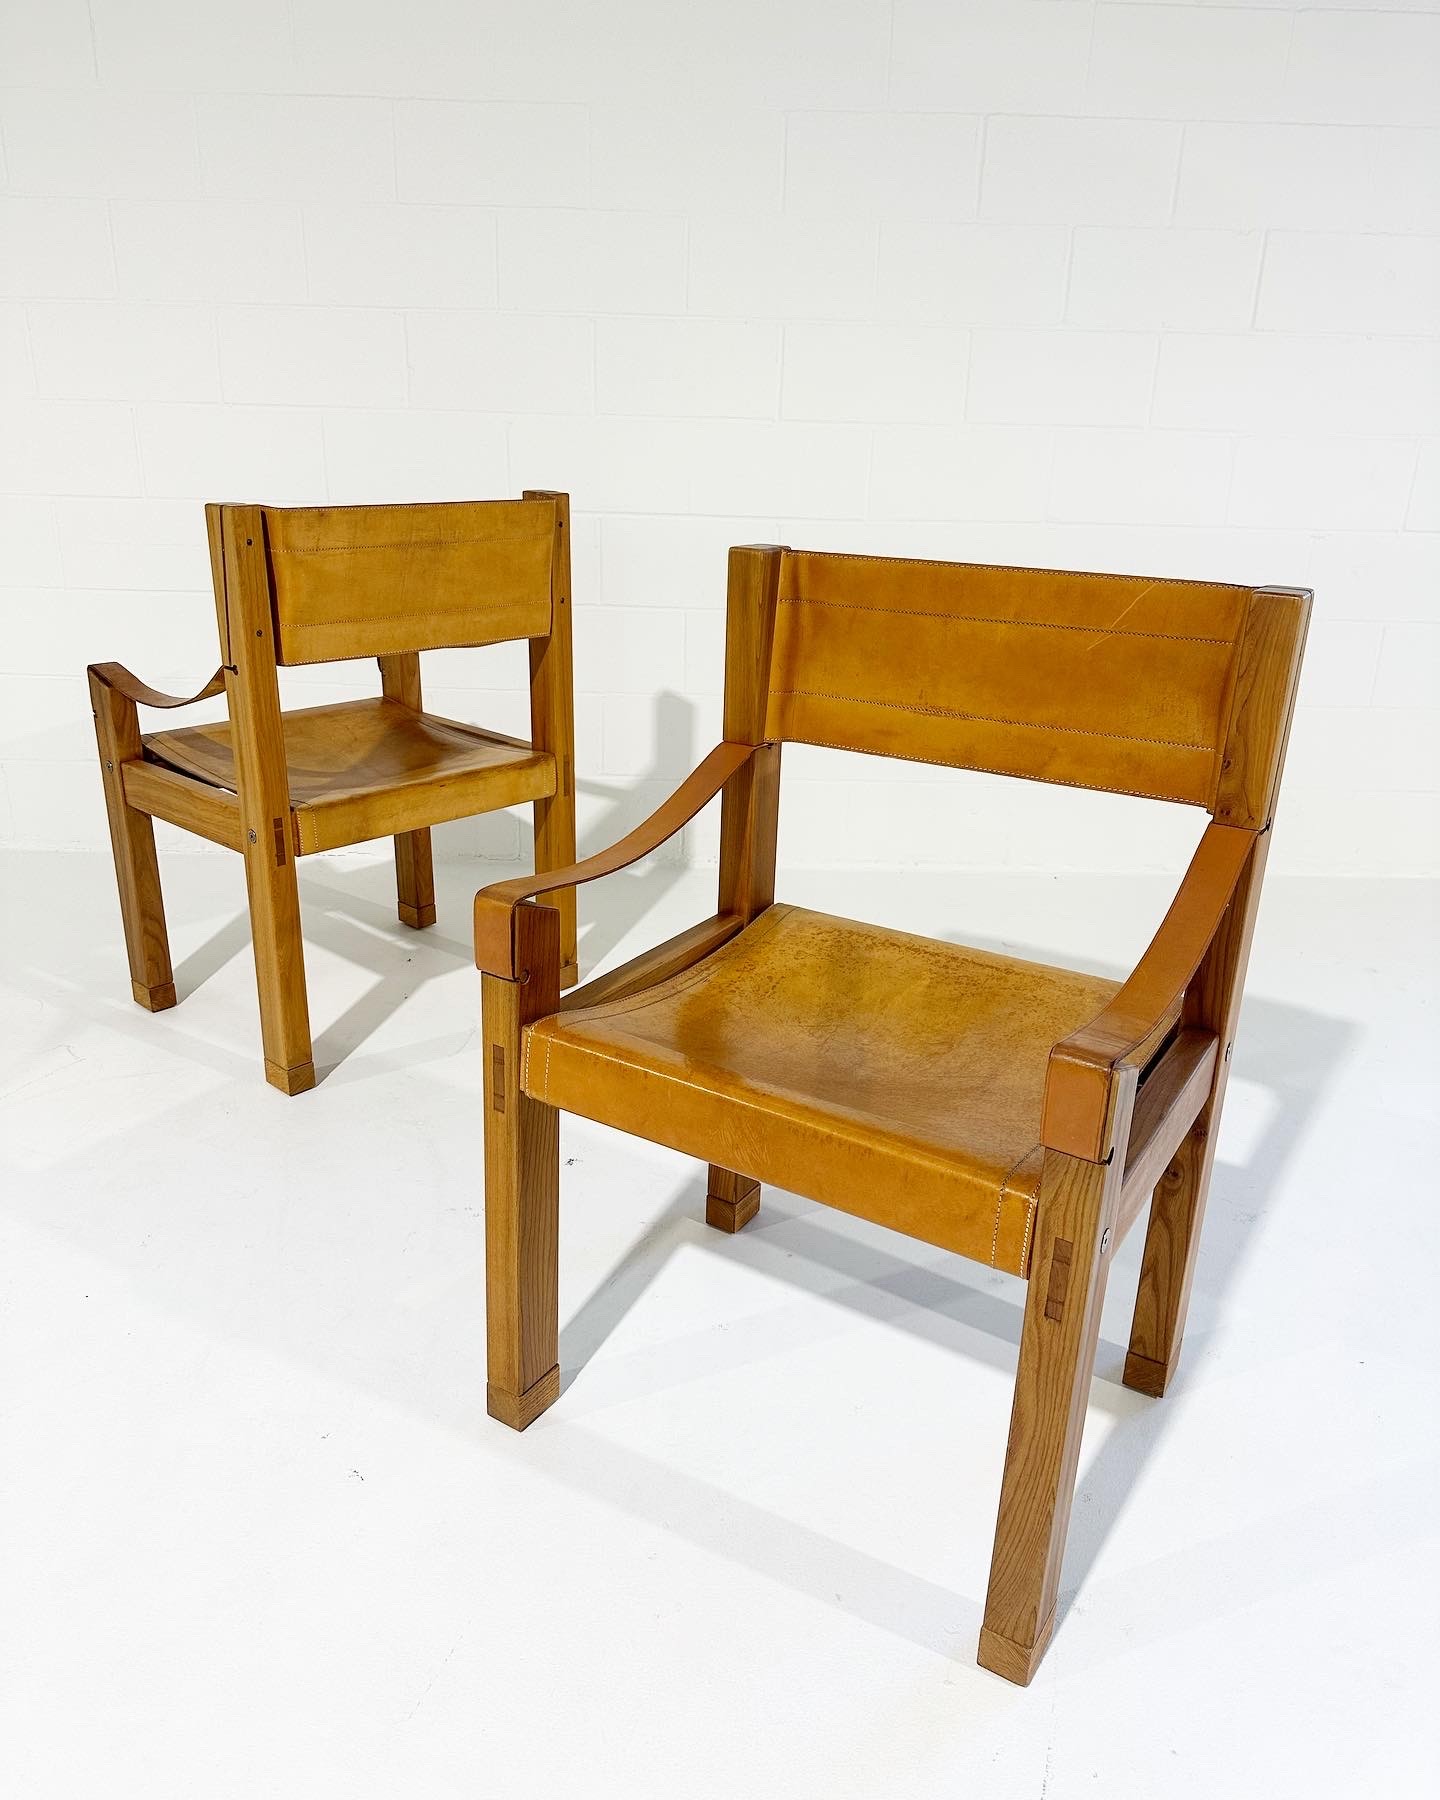 a couple of wooden chairs sitting next to each other